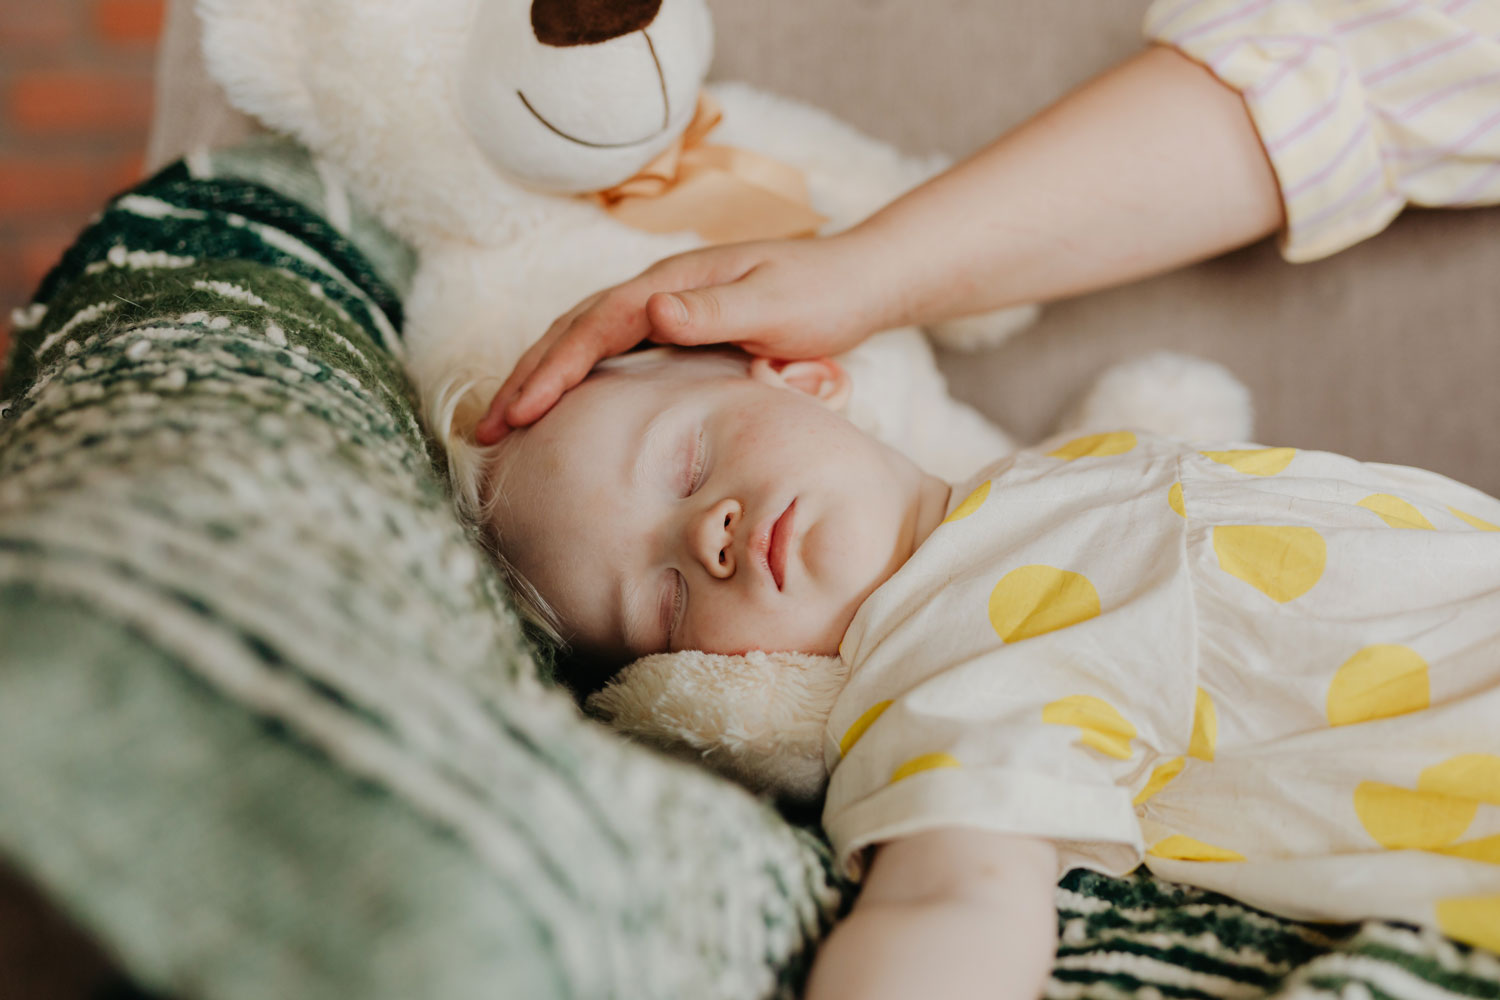 Toddler Pillow Safety: Choose the Right Pillow for Your Kids